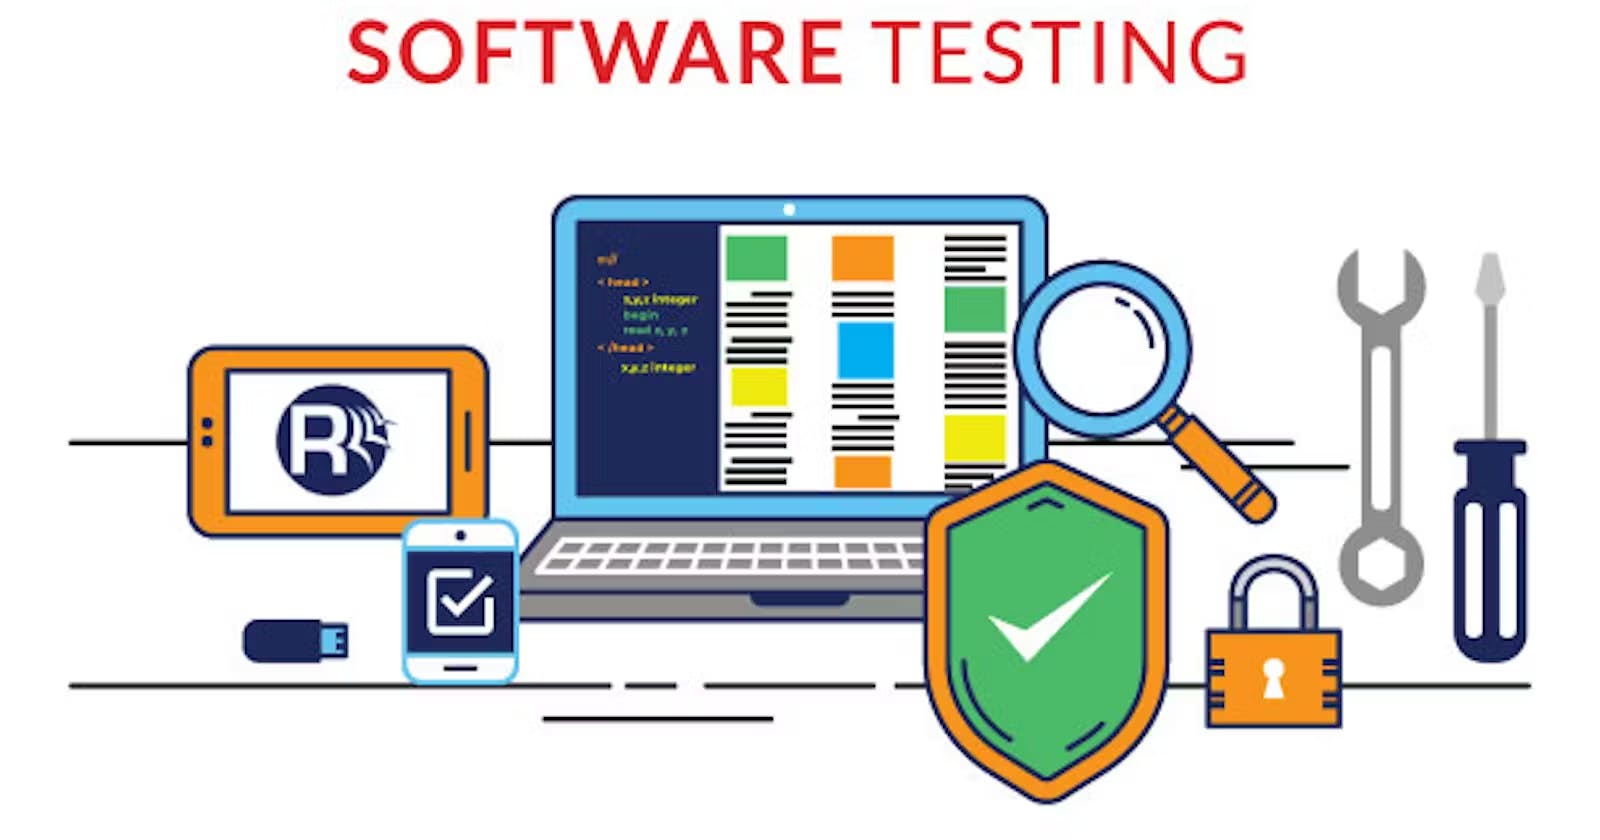 Practical Tips and Best Practices for Conducting effective Use Case Testing